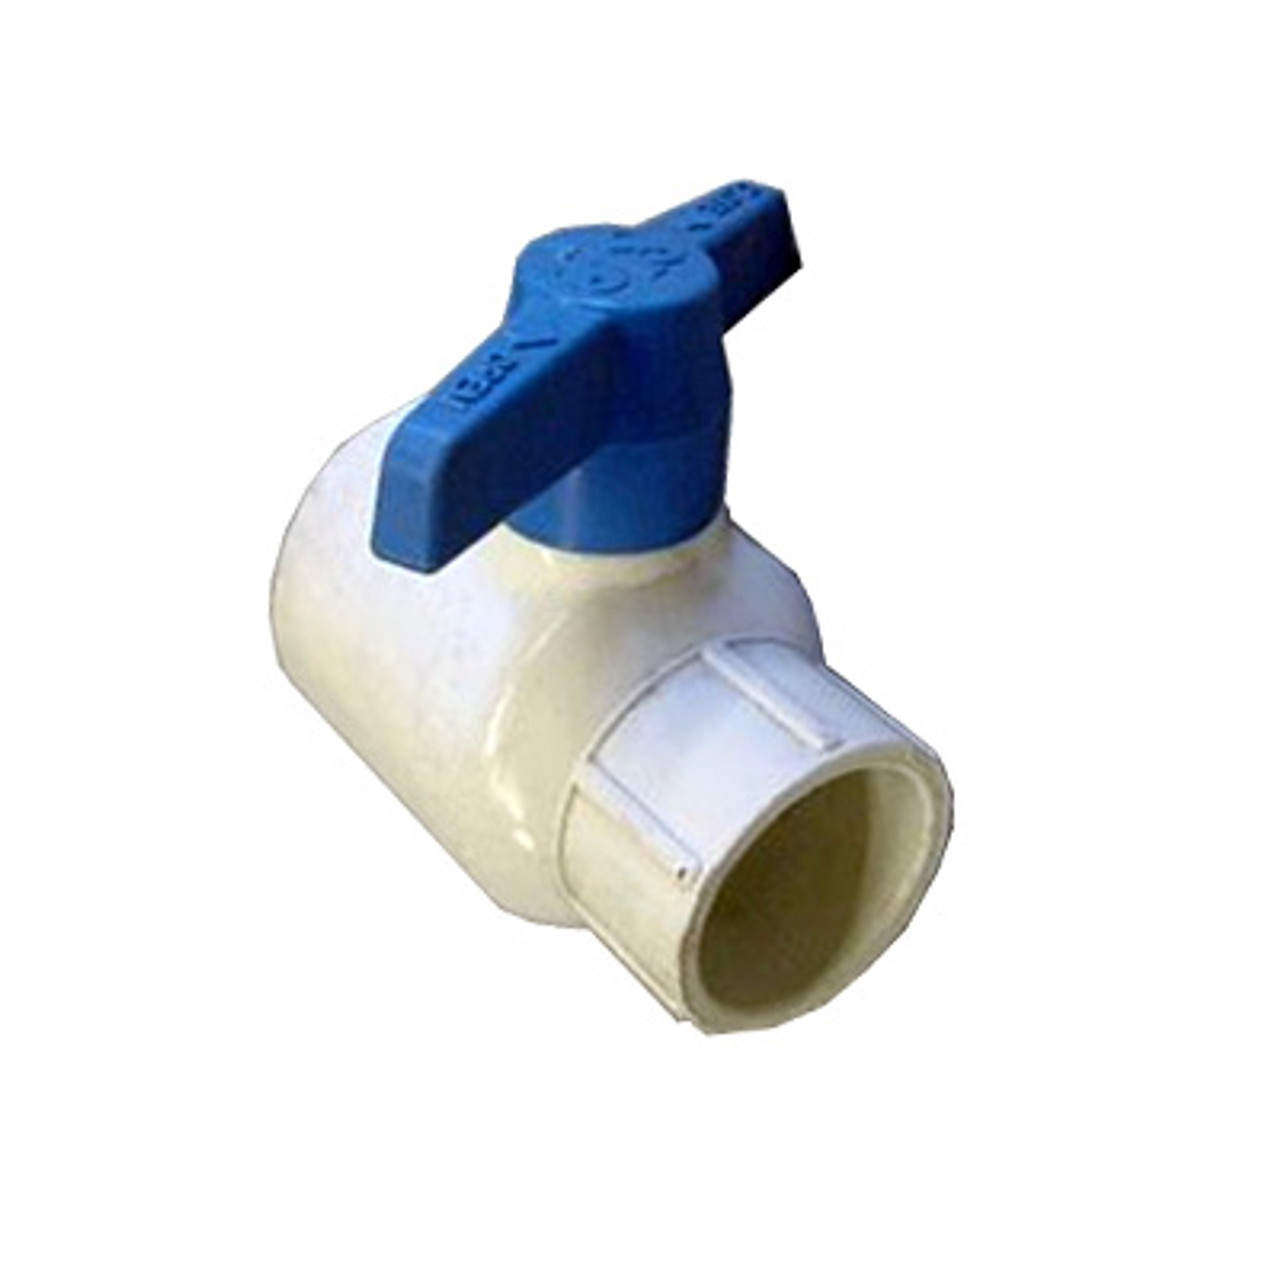 Master Spa - X278500 - 1 inch SxS Ball Valve - Side View
